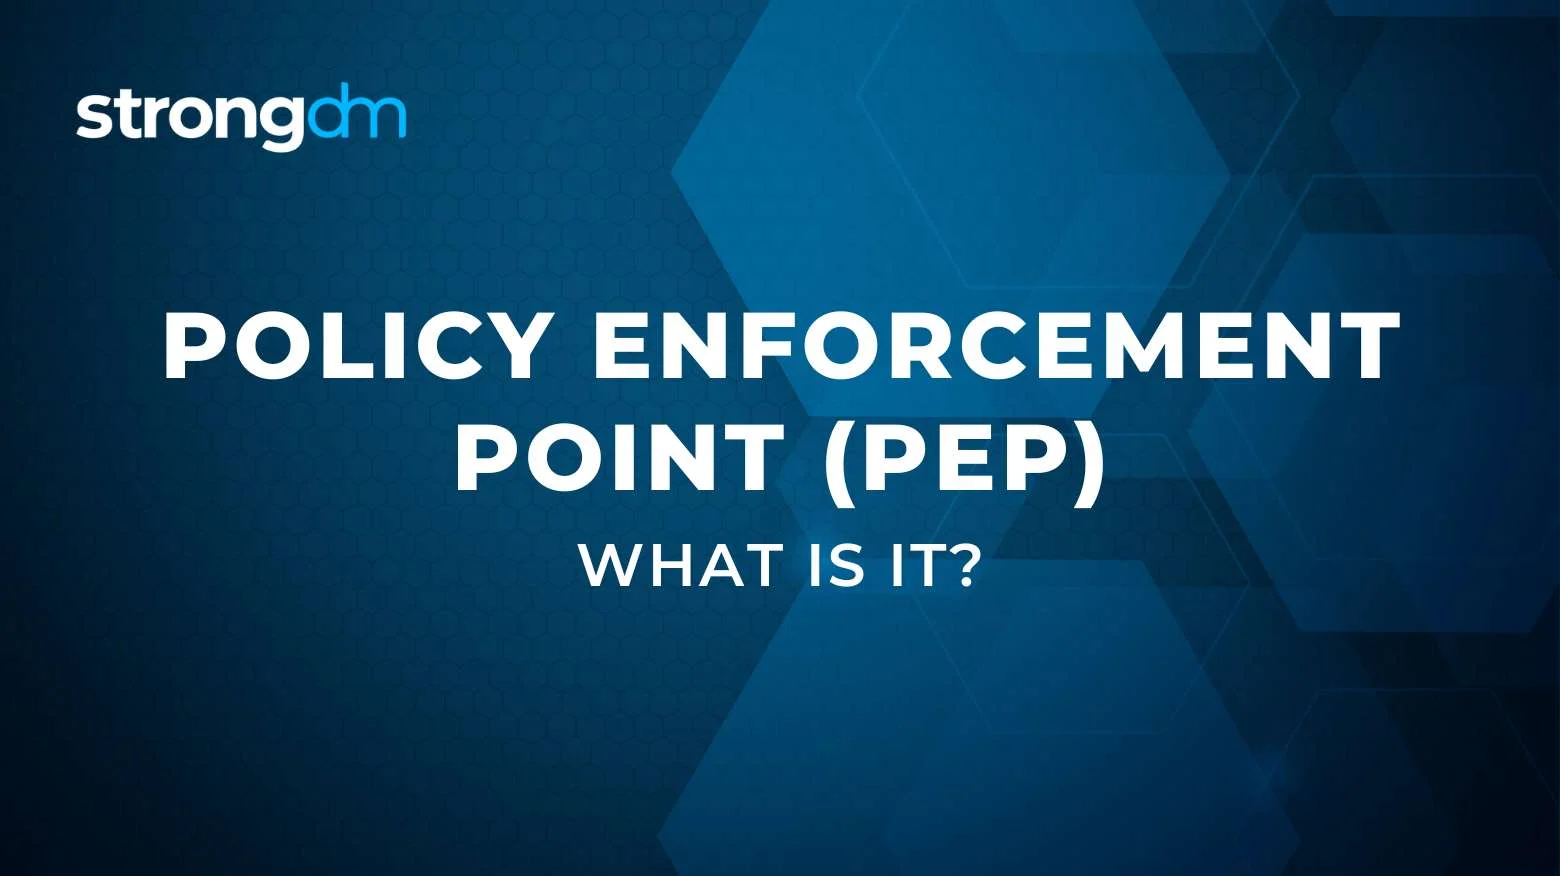 What Is a Policy Enforcement Point (PEP)?